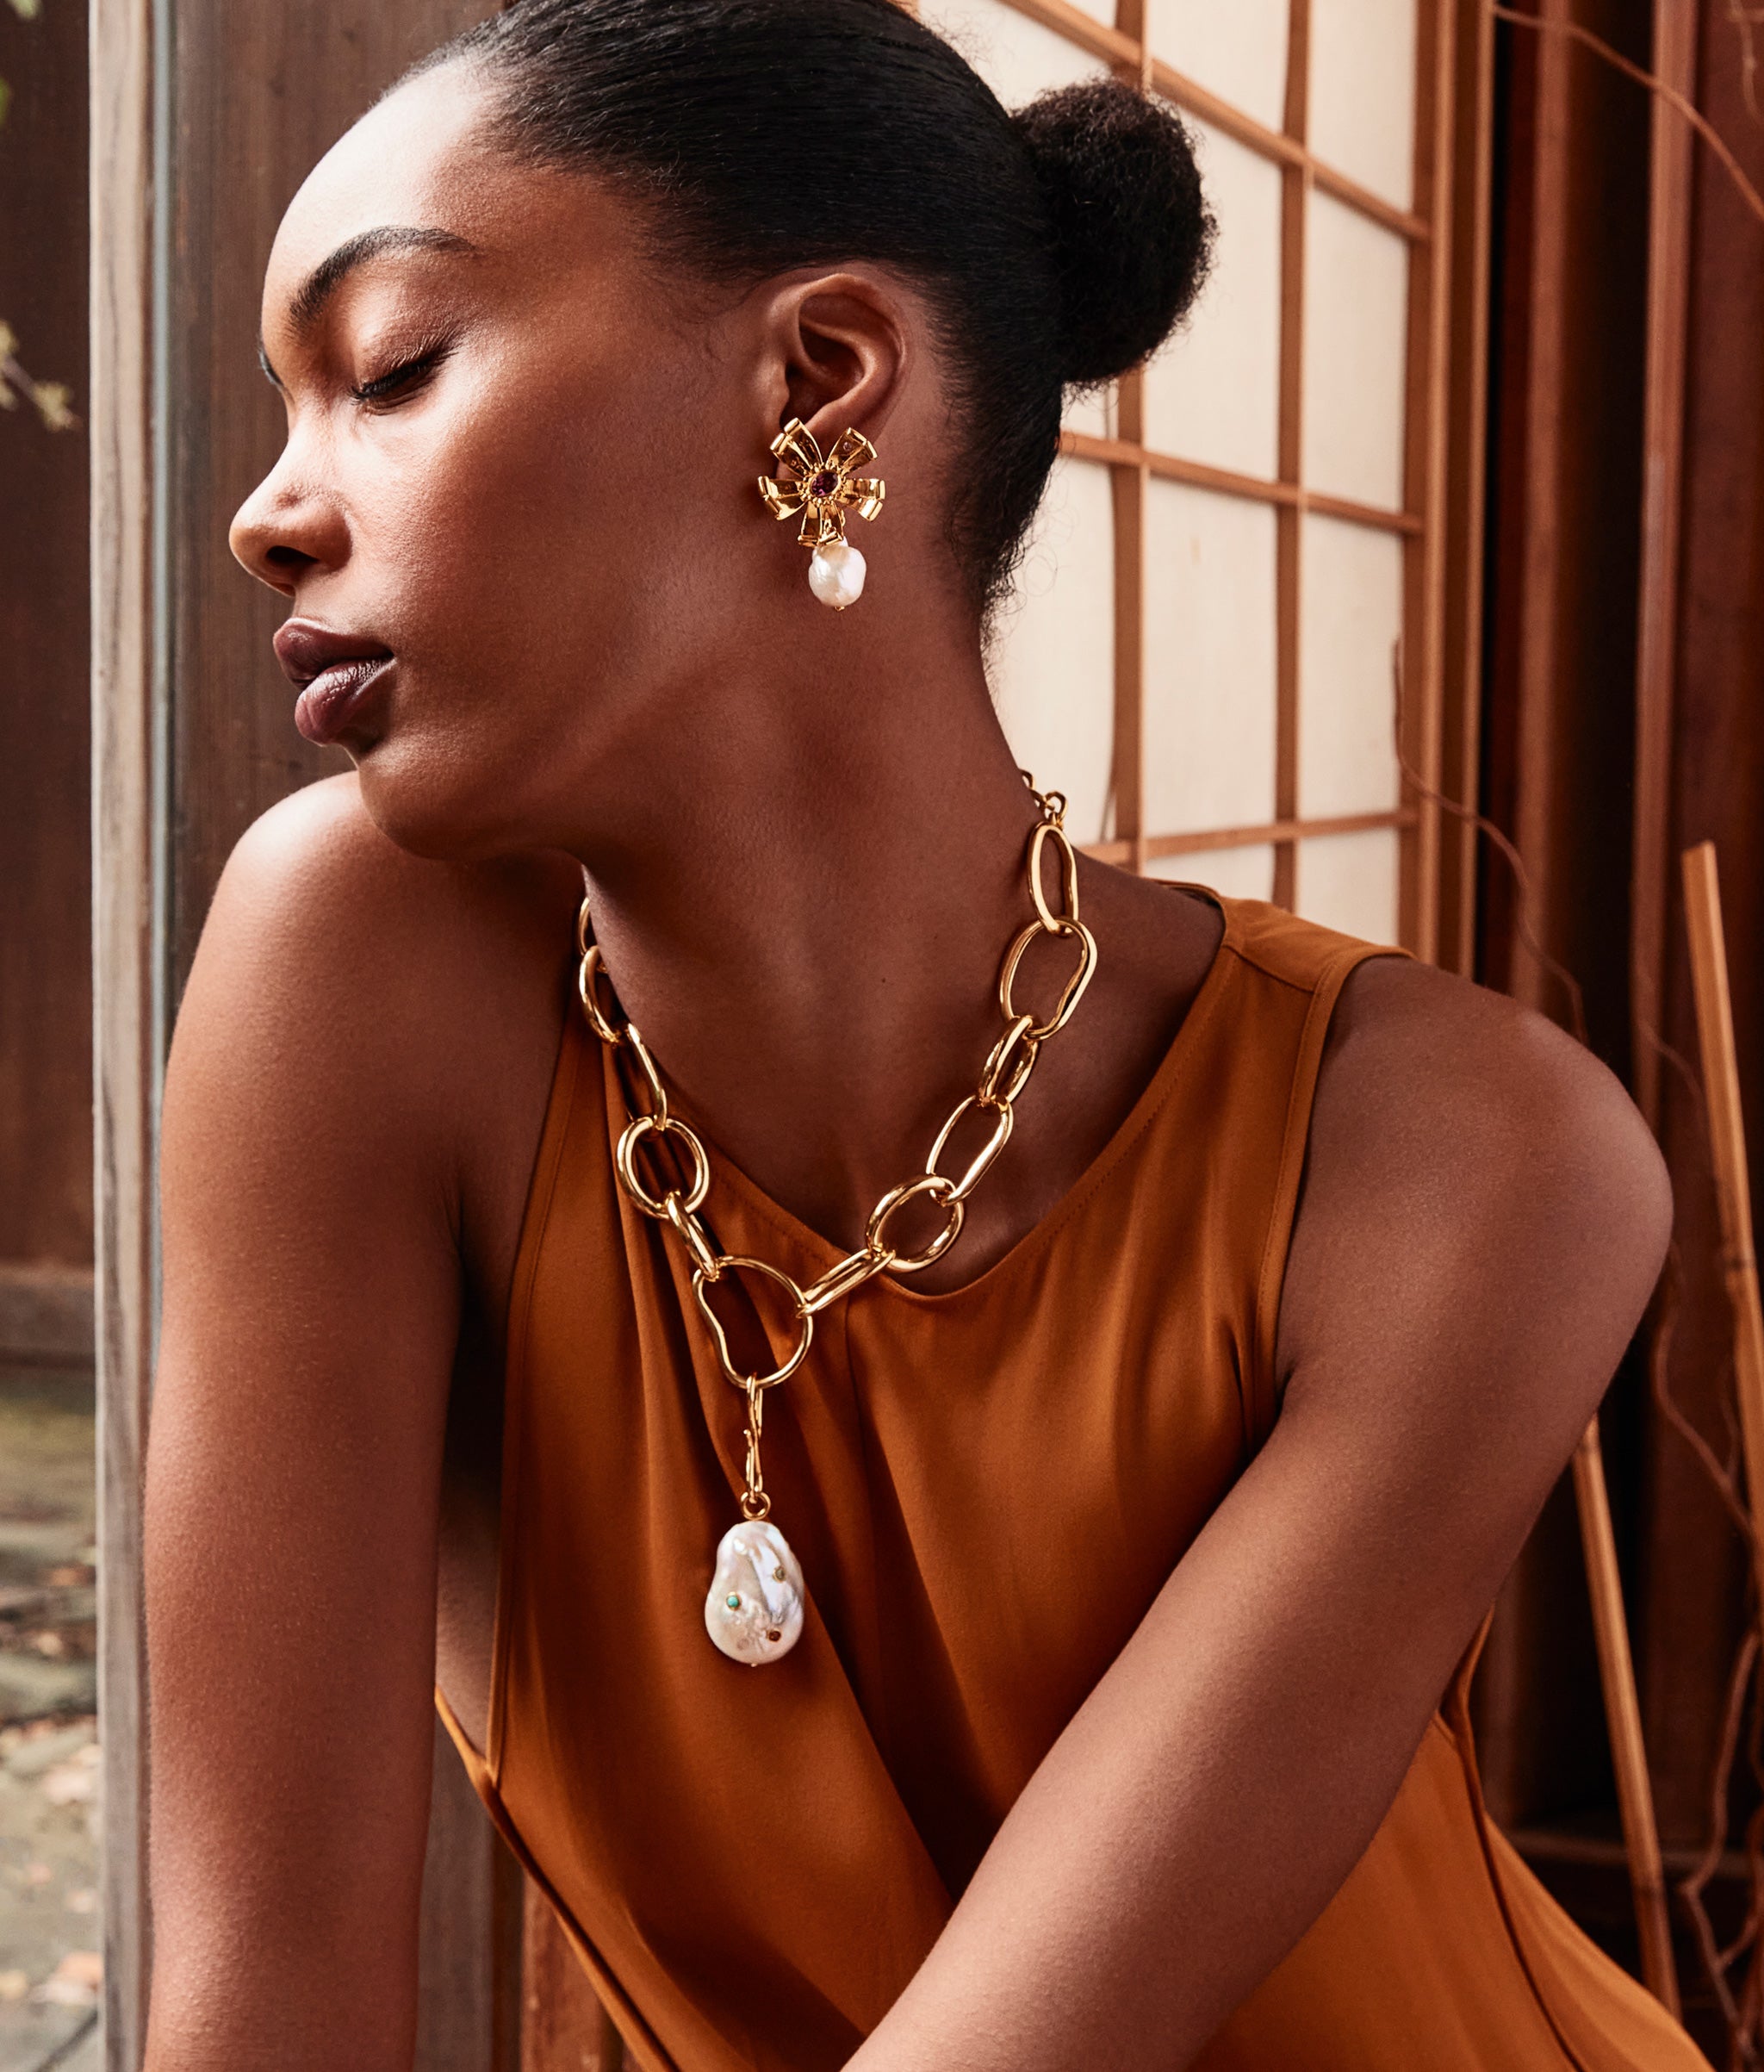 Model wears orange top with Porto Chain Necklace and Rainbow Oasis Charm.